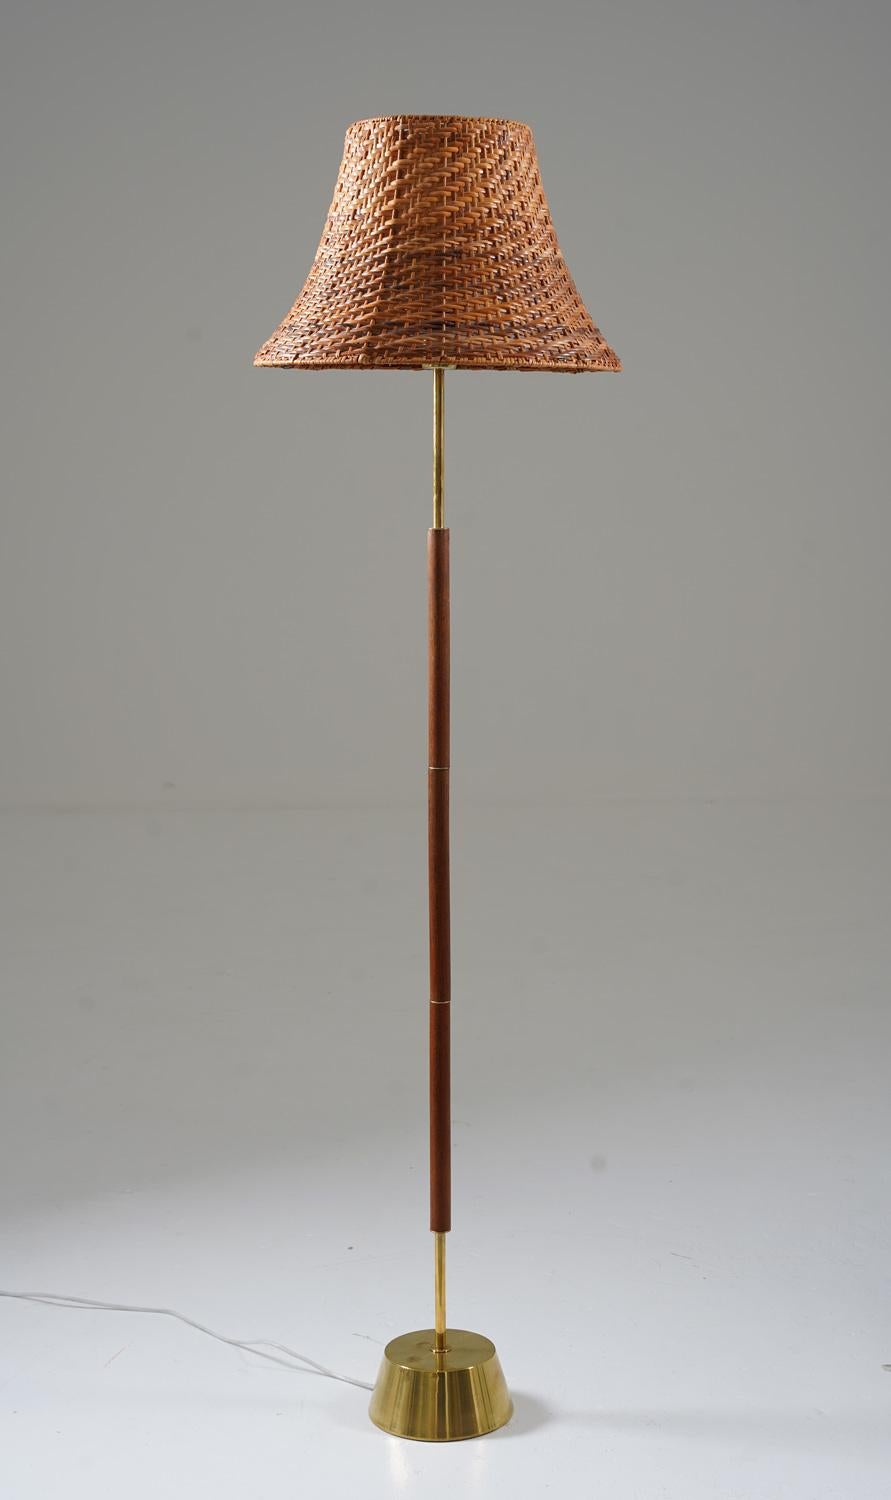 Simple and elegant floor lamp in teak and brass by Boréns, Sweden. 
The lamp features a heavy brass base, supporting a rod in teak with brass details. The lamp comes with a vintage rattan shade. 

Condition: Very good original condition, a few